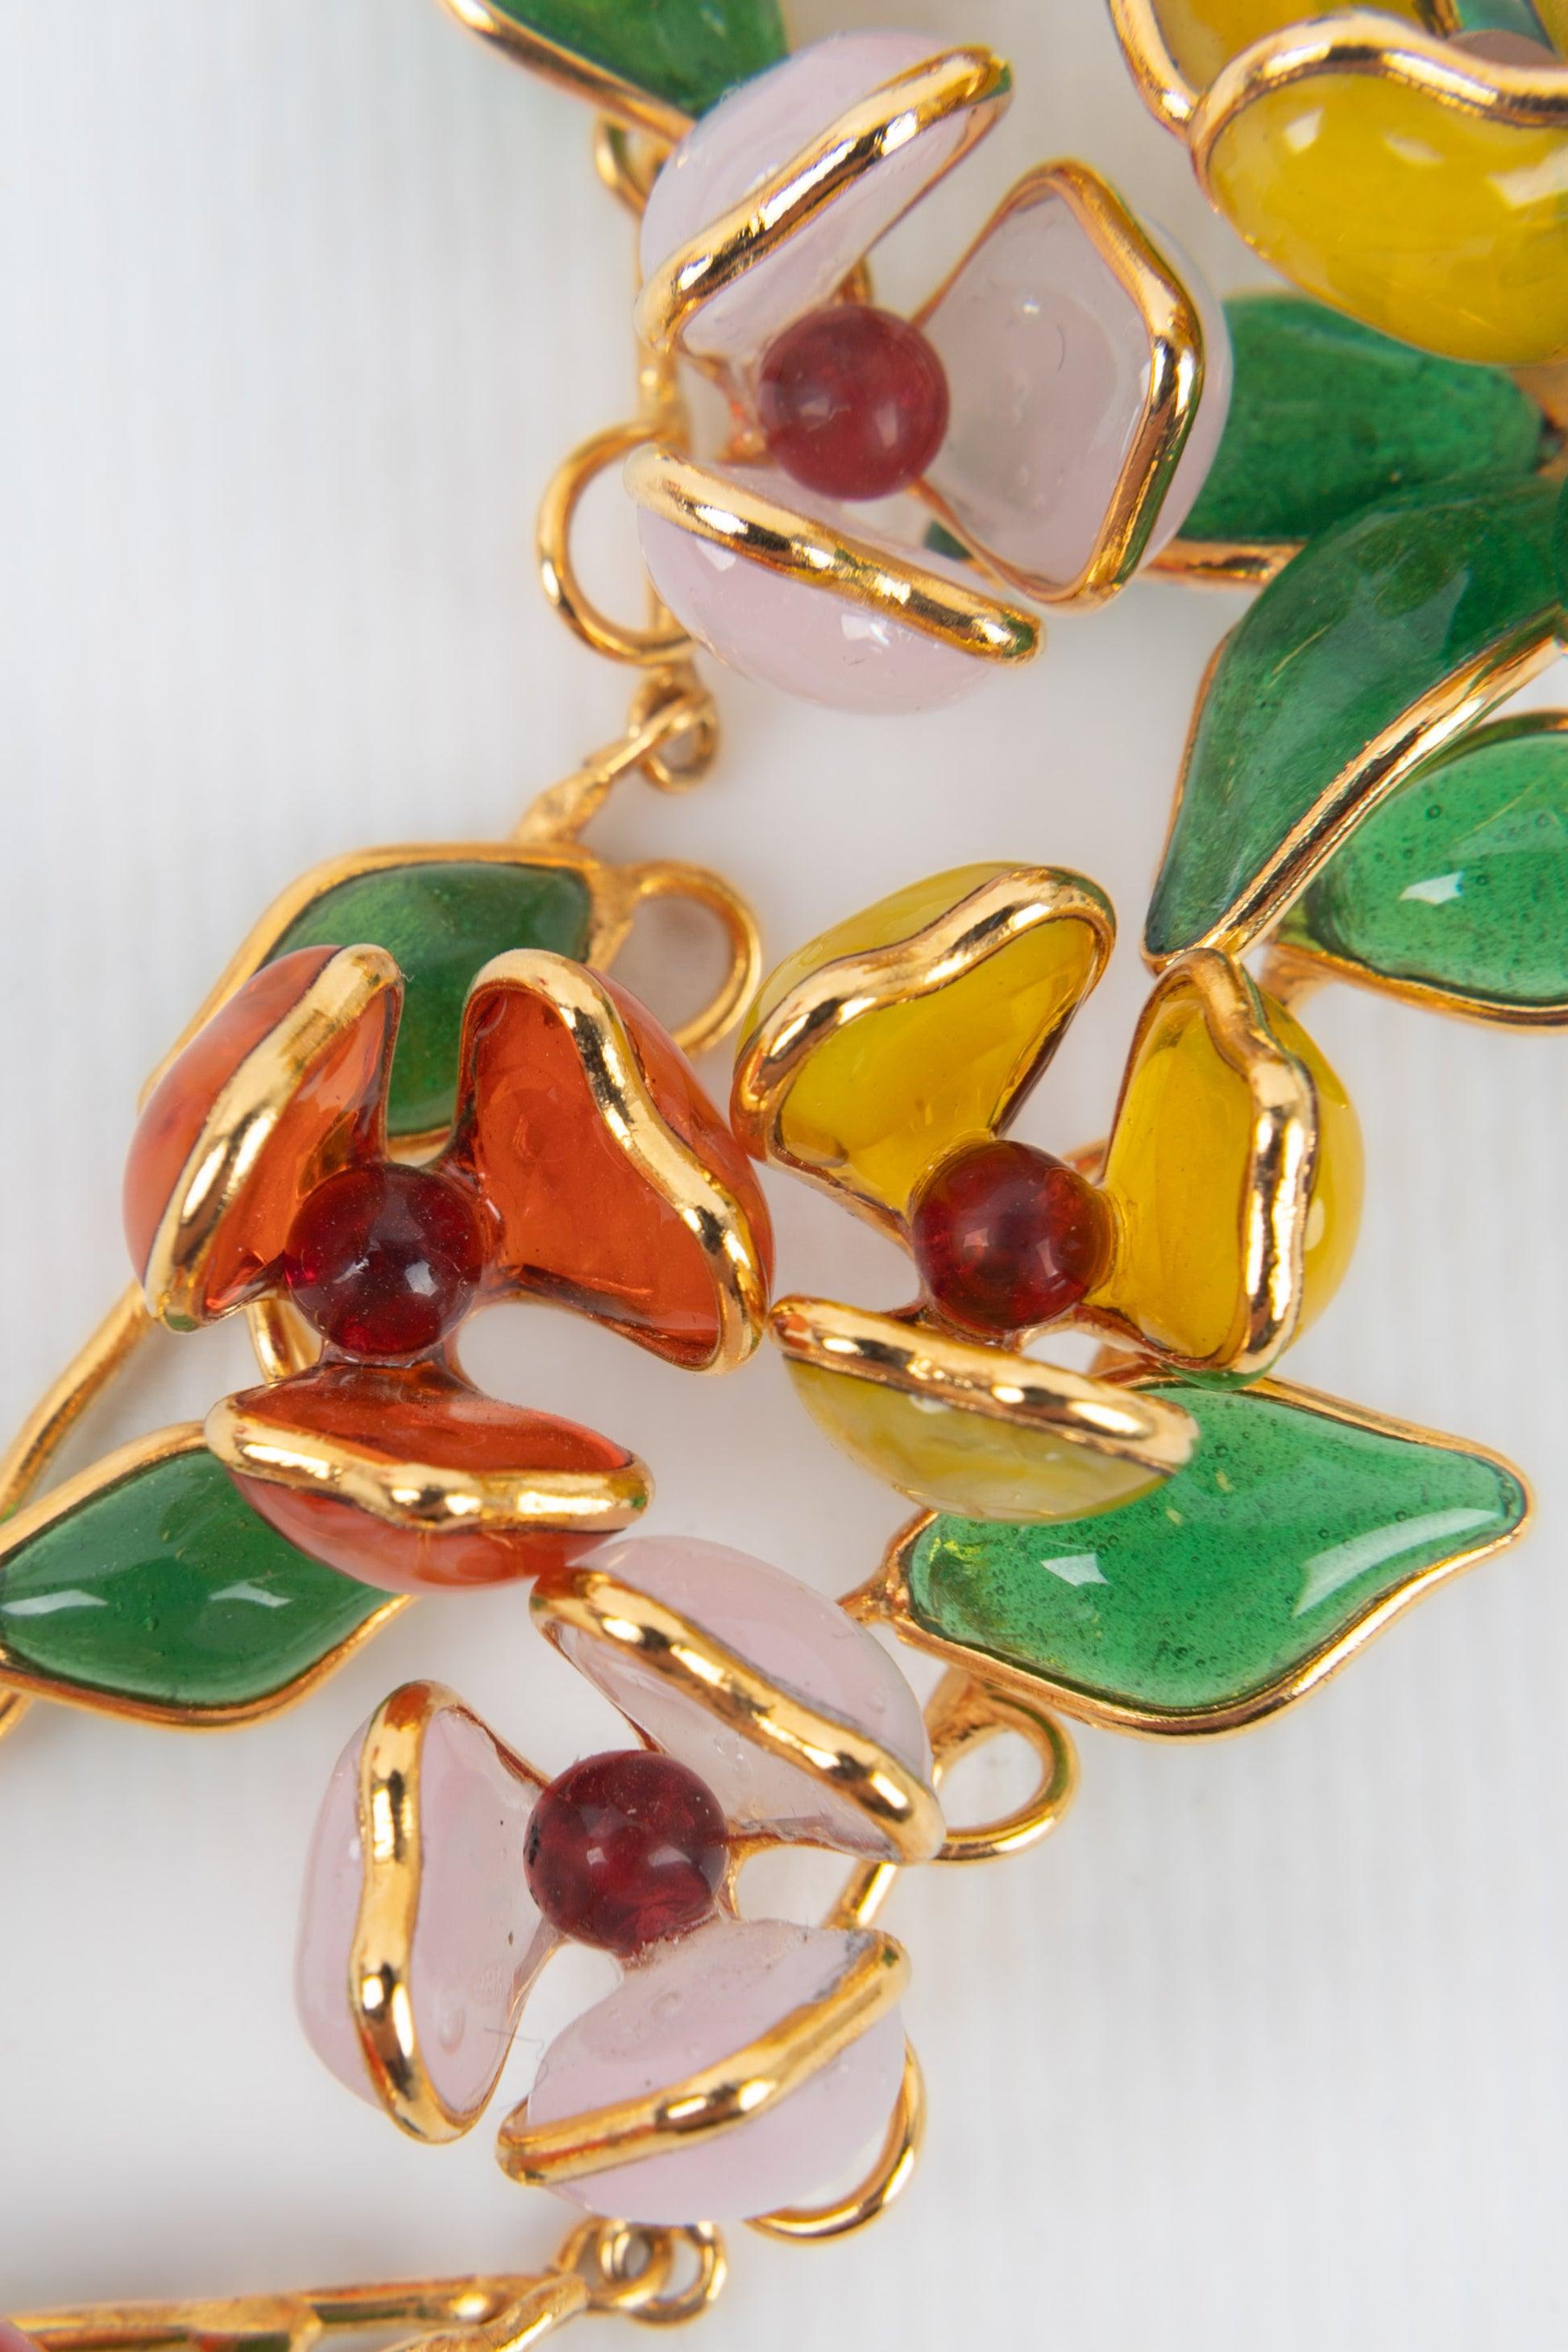 Augustine Golden Metal Earrings with Glass Paste in Orange and Yellow Tones For Sale 3